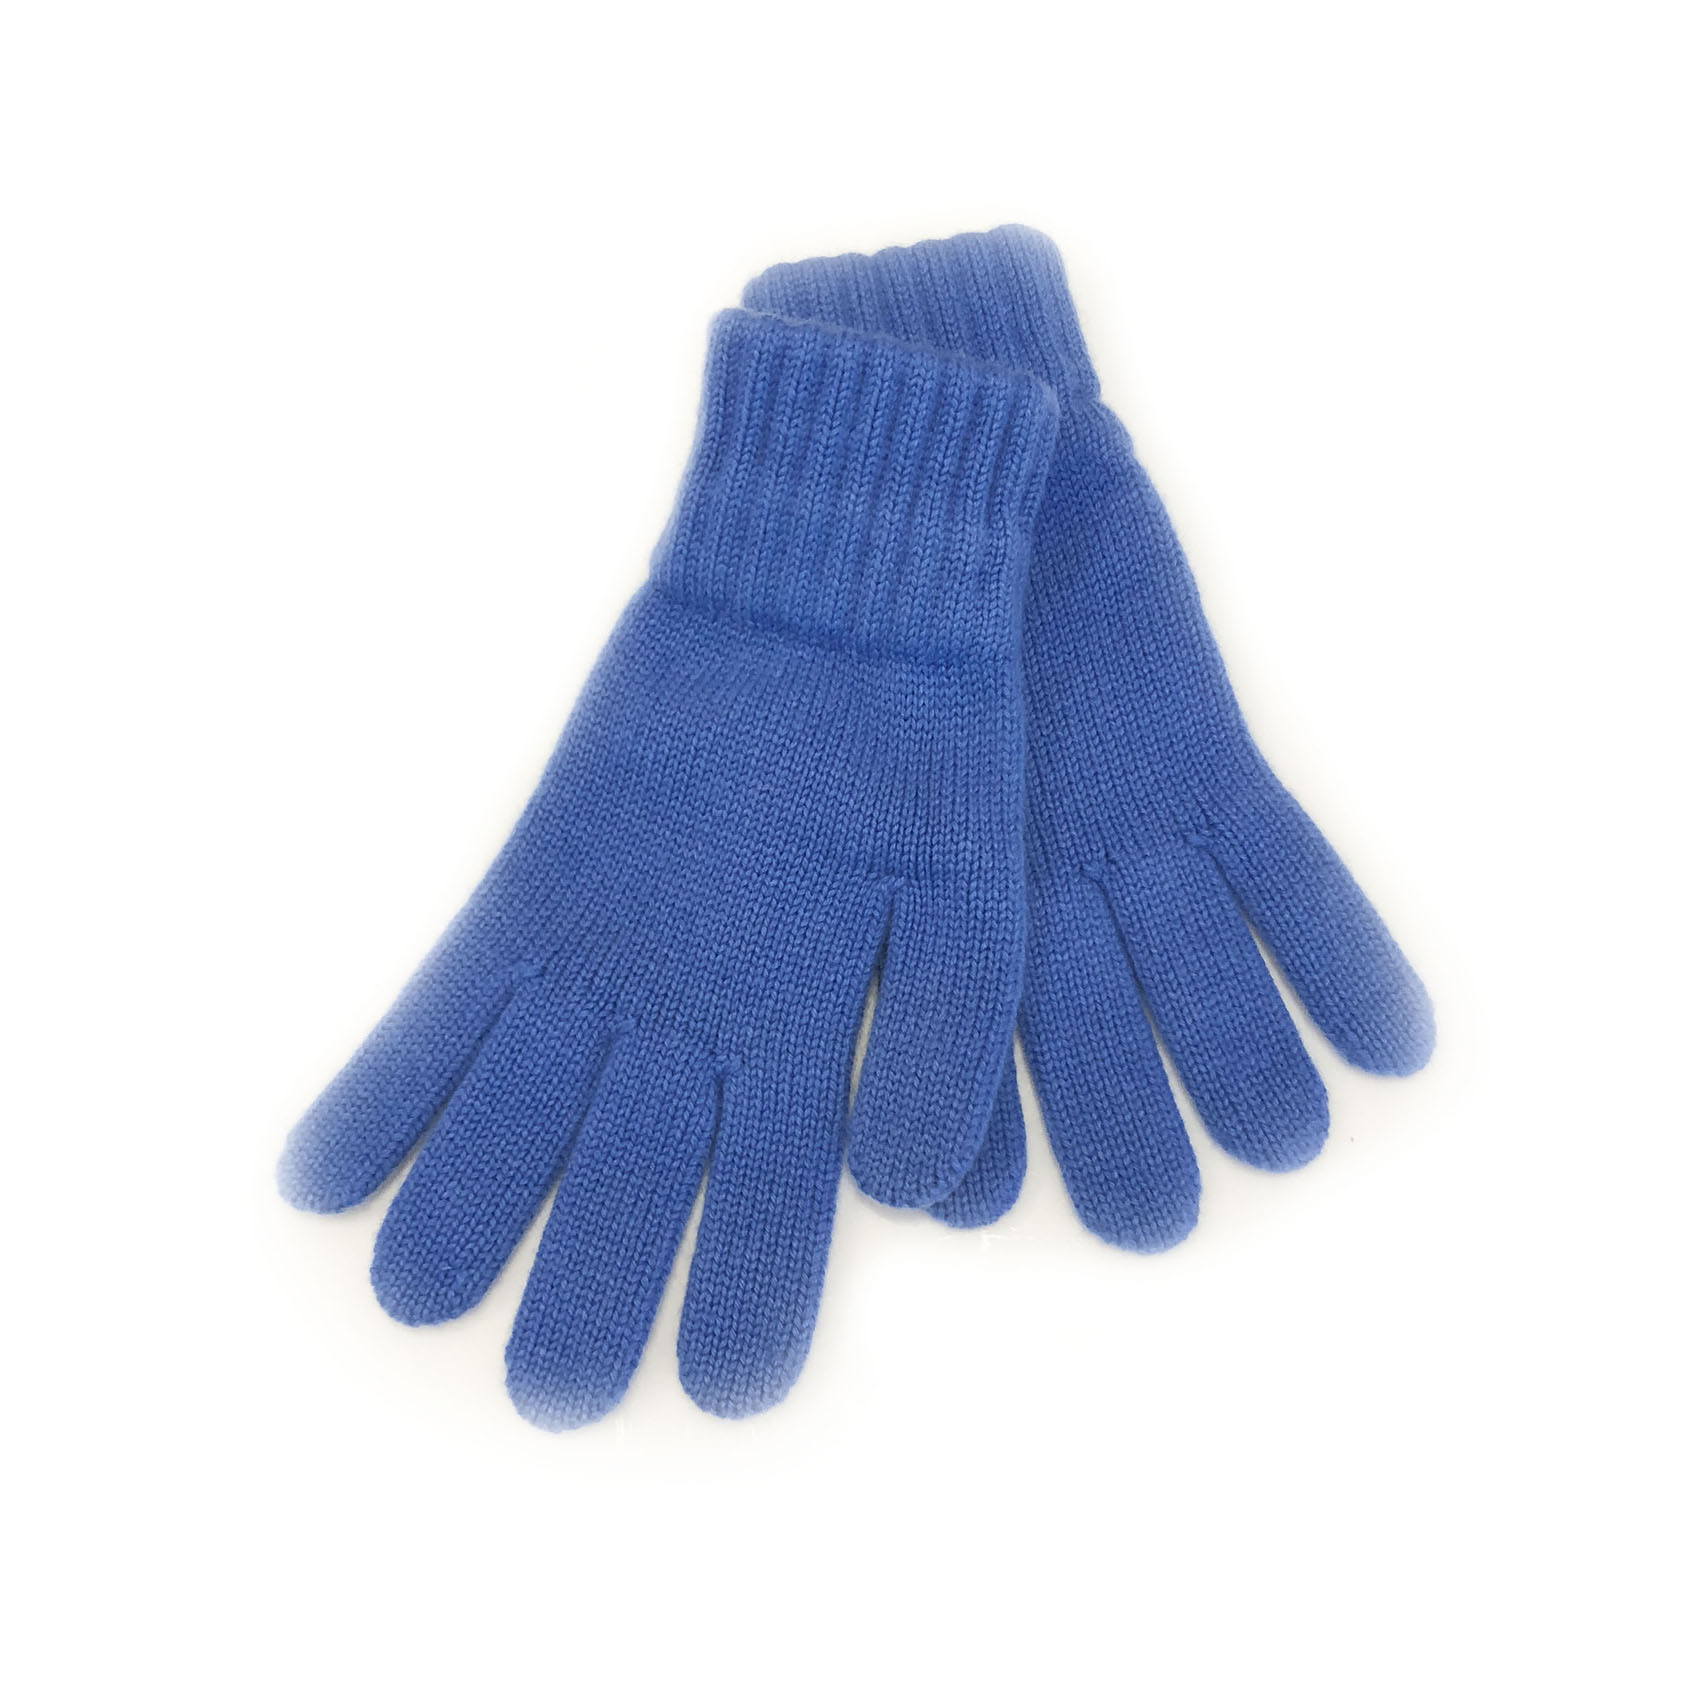 An image of Ladies 100% Cashmere Gloves - Isfahan Blue